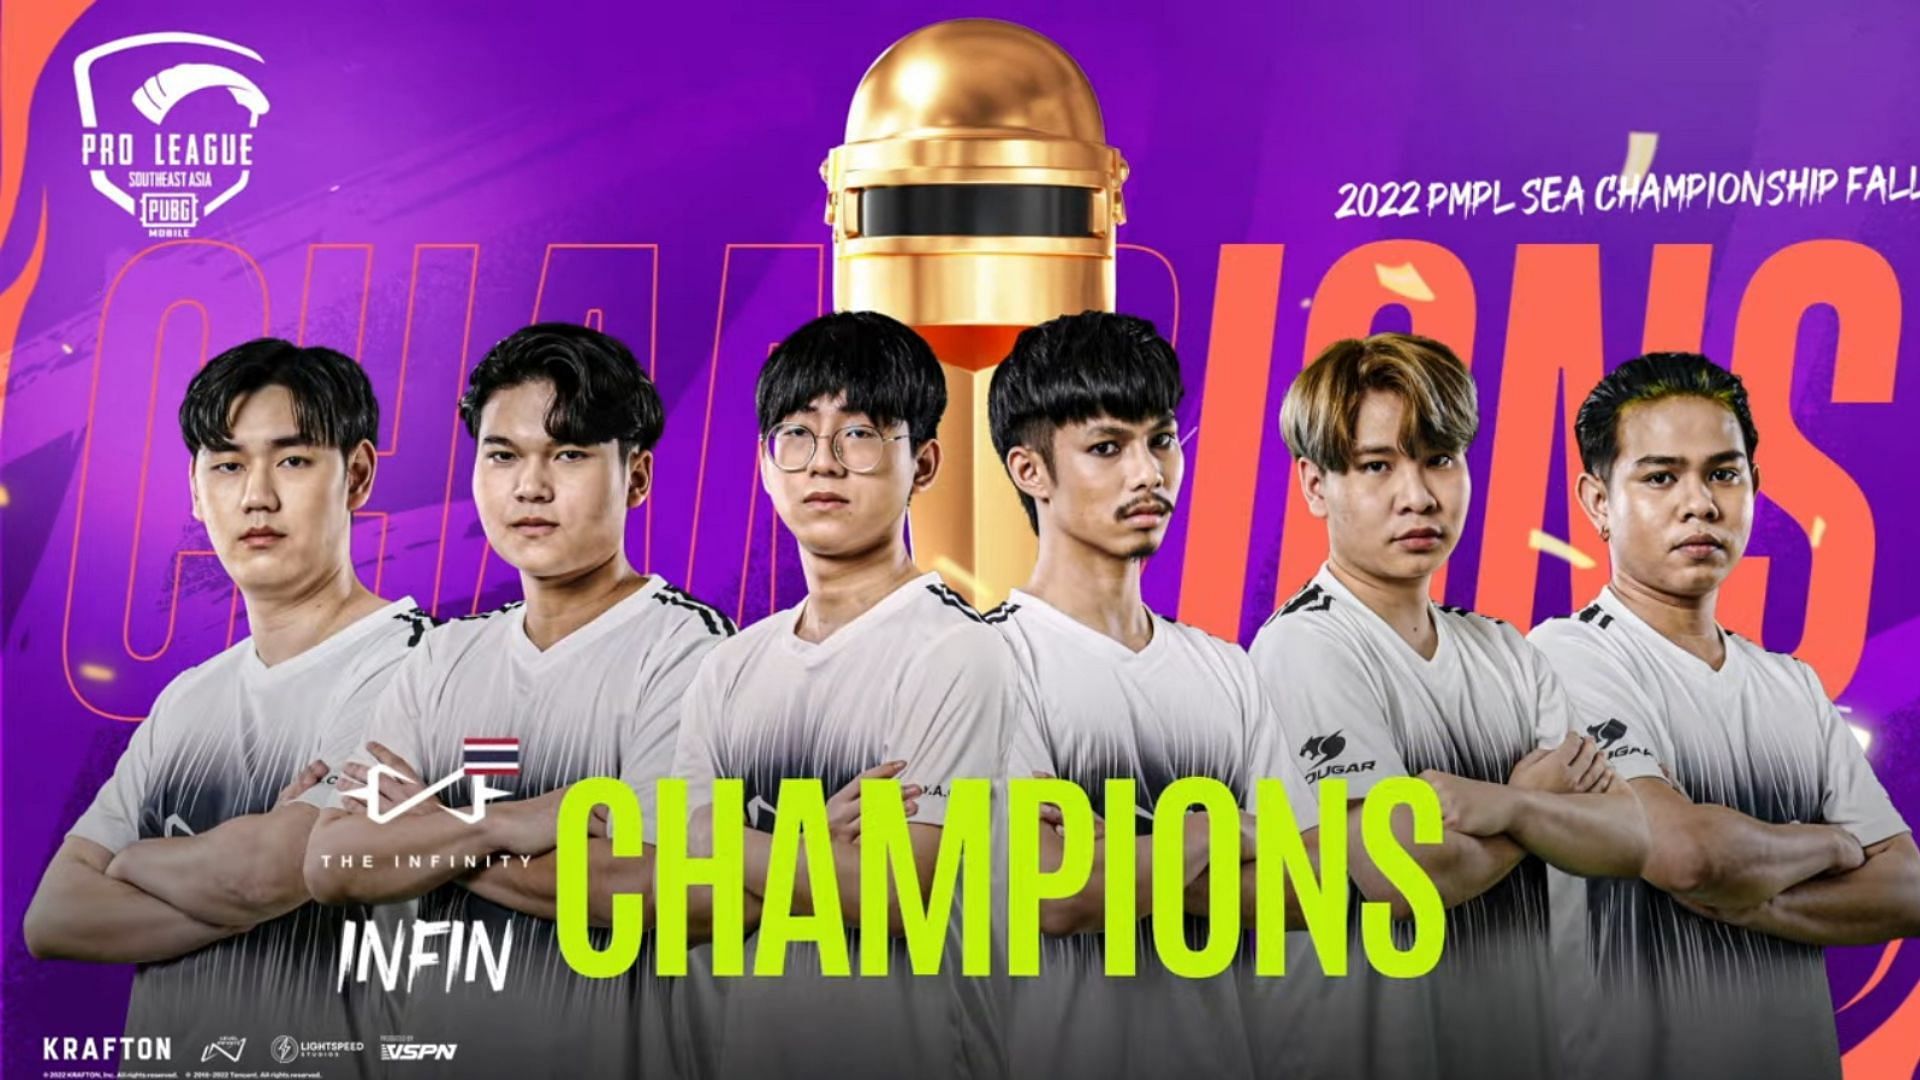 Infinity clinched PMPL SEA Championship Fall trophy (Image via PUBG Mobile)